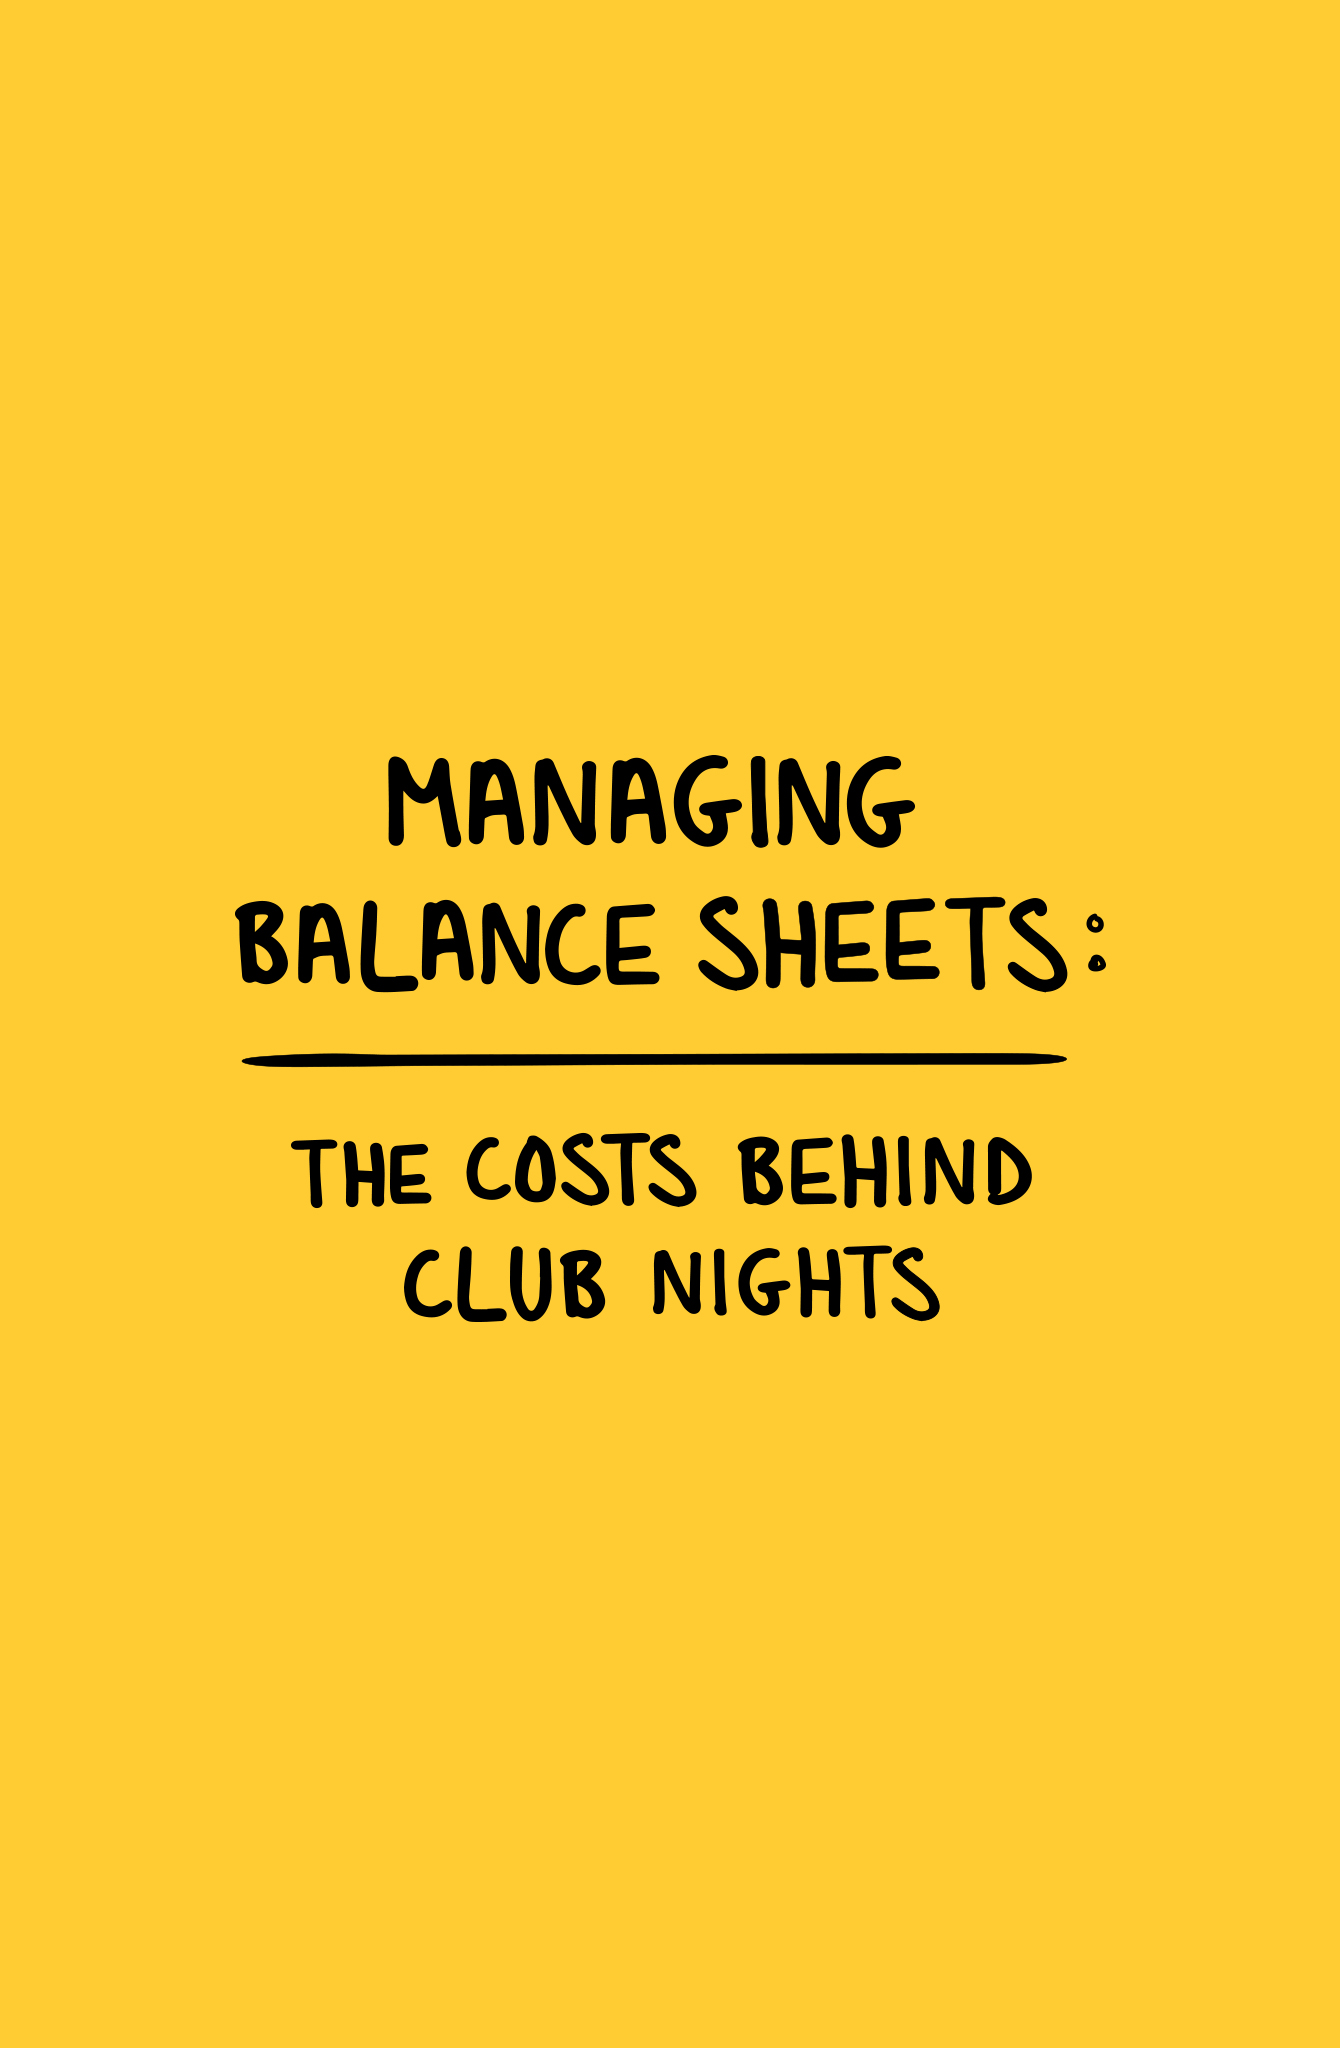 How Much Does It Cost to Throw a Club Night?